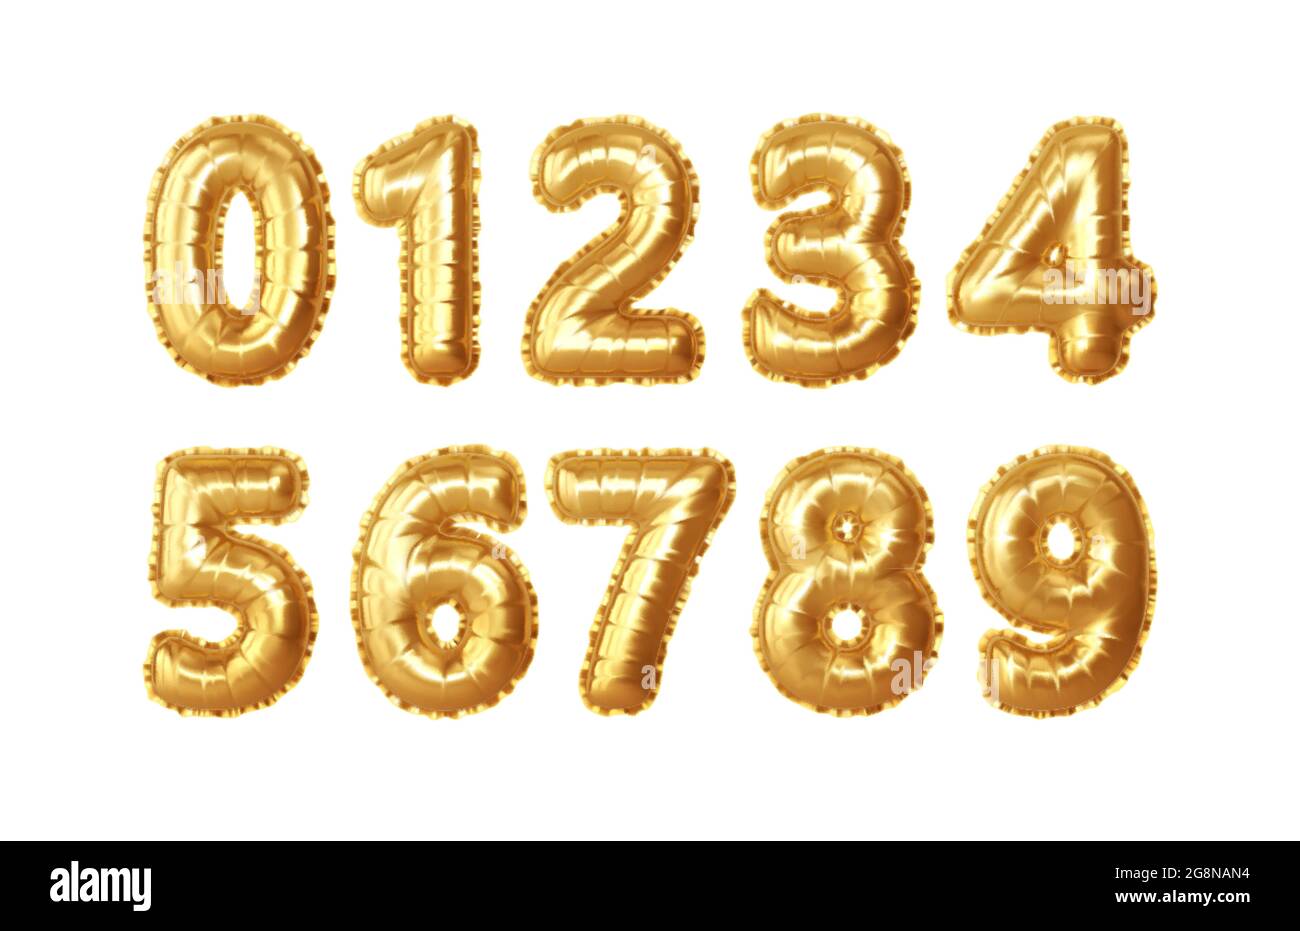 Set of 0,1,2,3,4,5,6,7,8,9 numbers of gold foil balloons. Golden realistic numbers balloons for numbering anniversary, birthday, new year. Vector Stock Vector